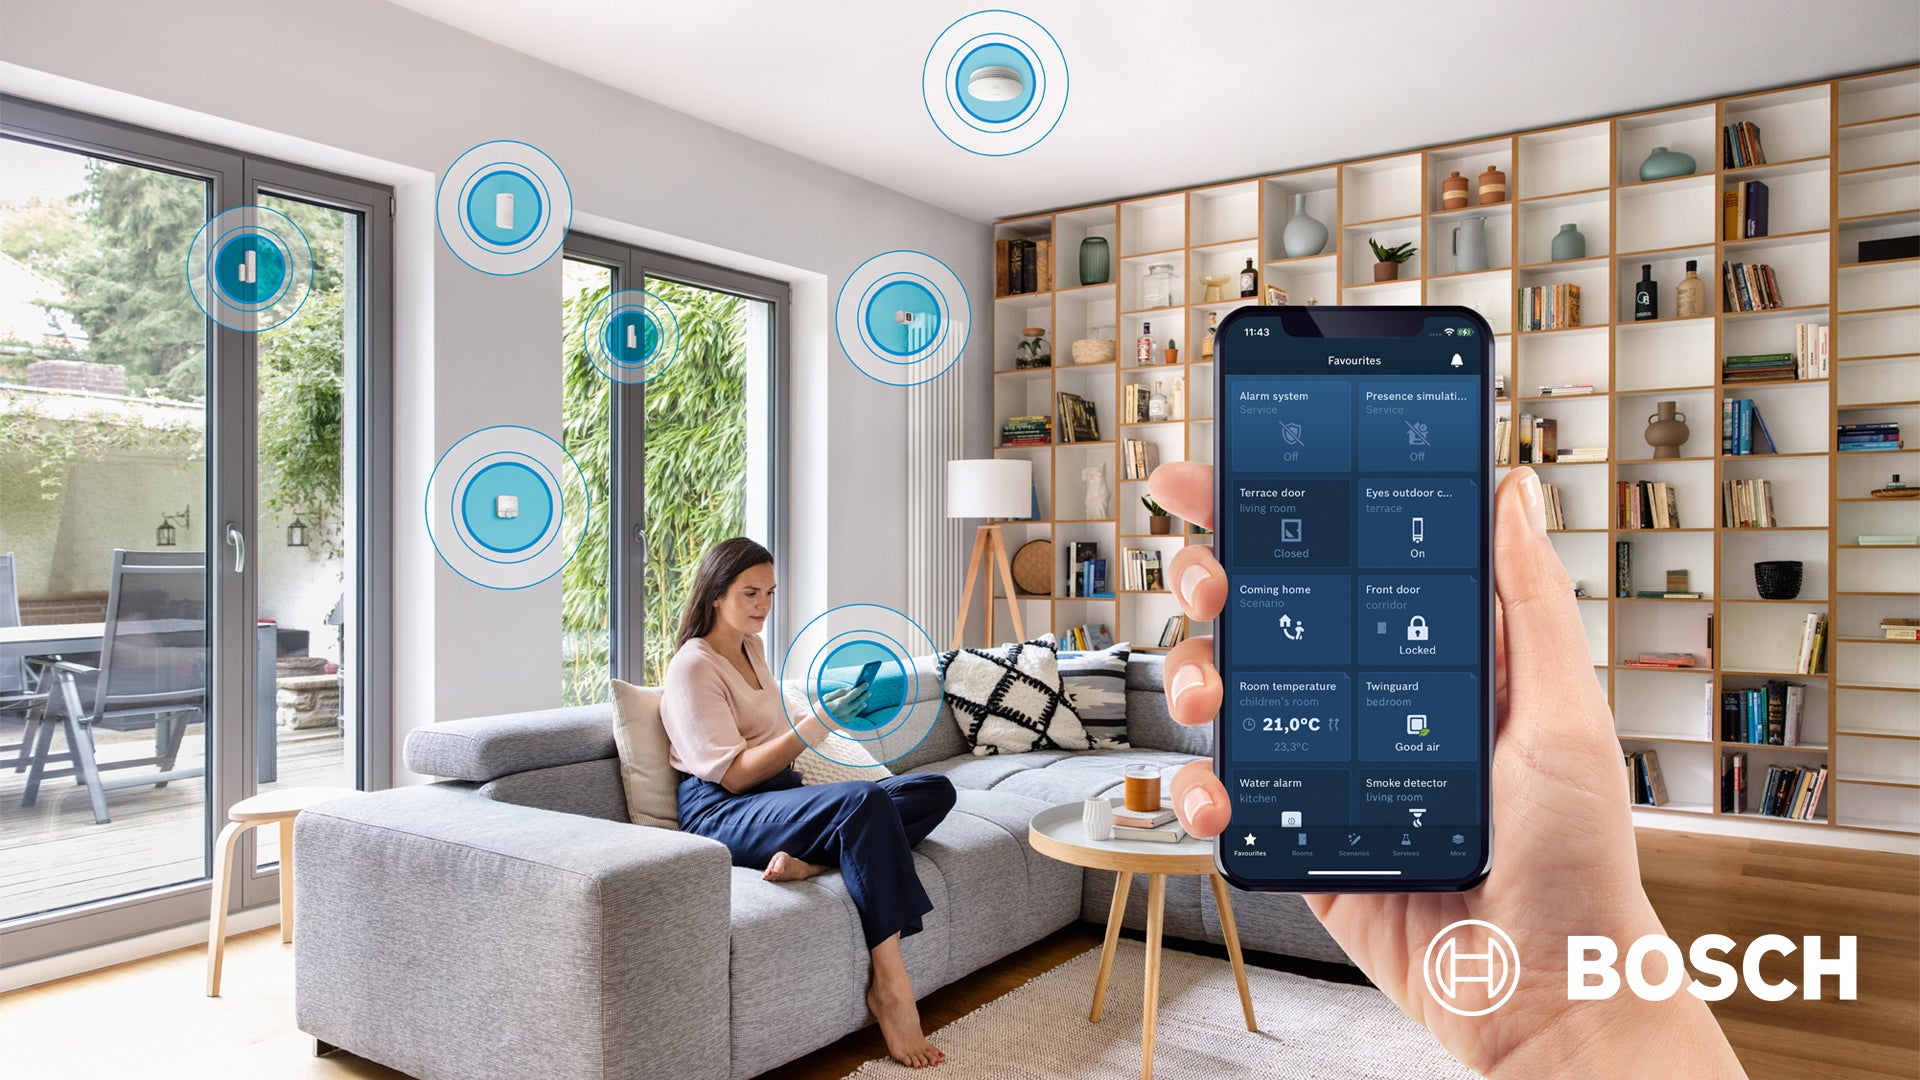 Bosch Security and Safety Systems - Comet